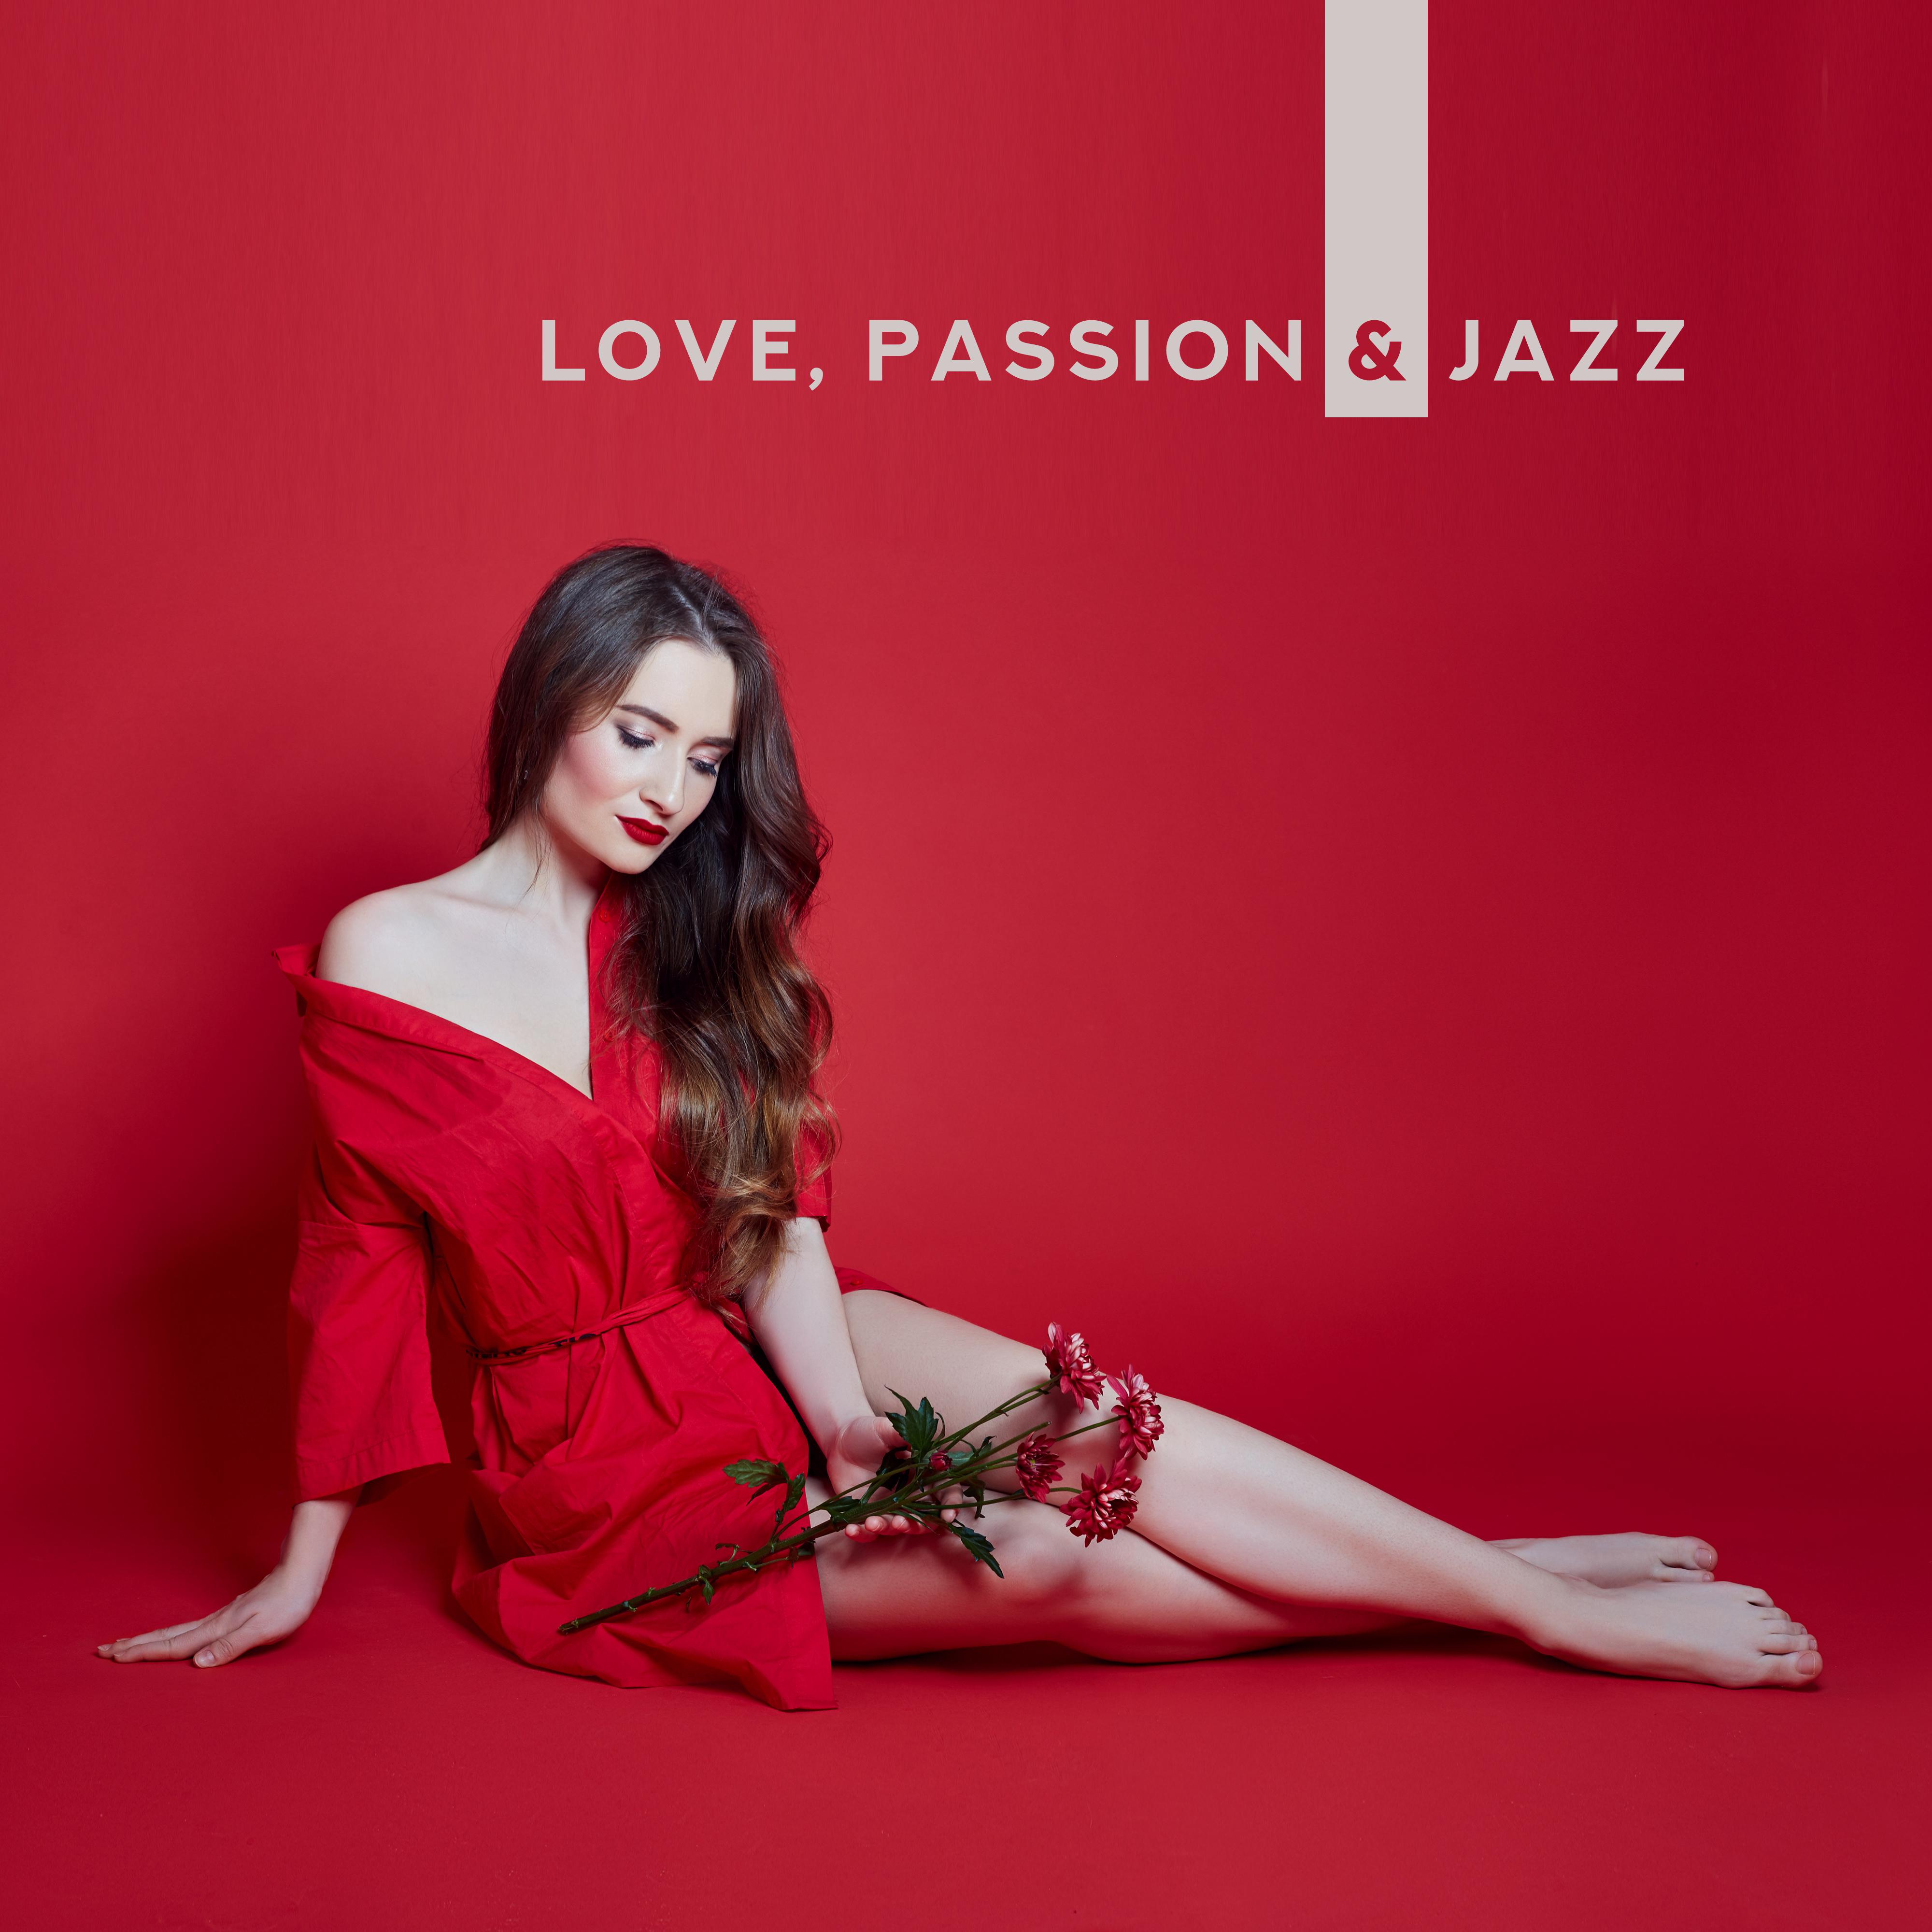 Love, Passion  Jazz: 2019 Romantic Smooth Jazz Instrumental Music for Couple' s, Songs for Dating  Eating Tasty Dinner in the Restaurant, Anniversary, Celebrating Happy Moments Together